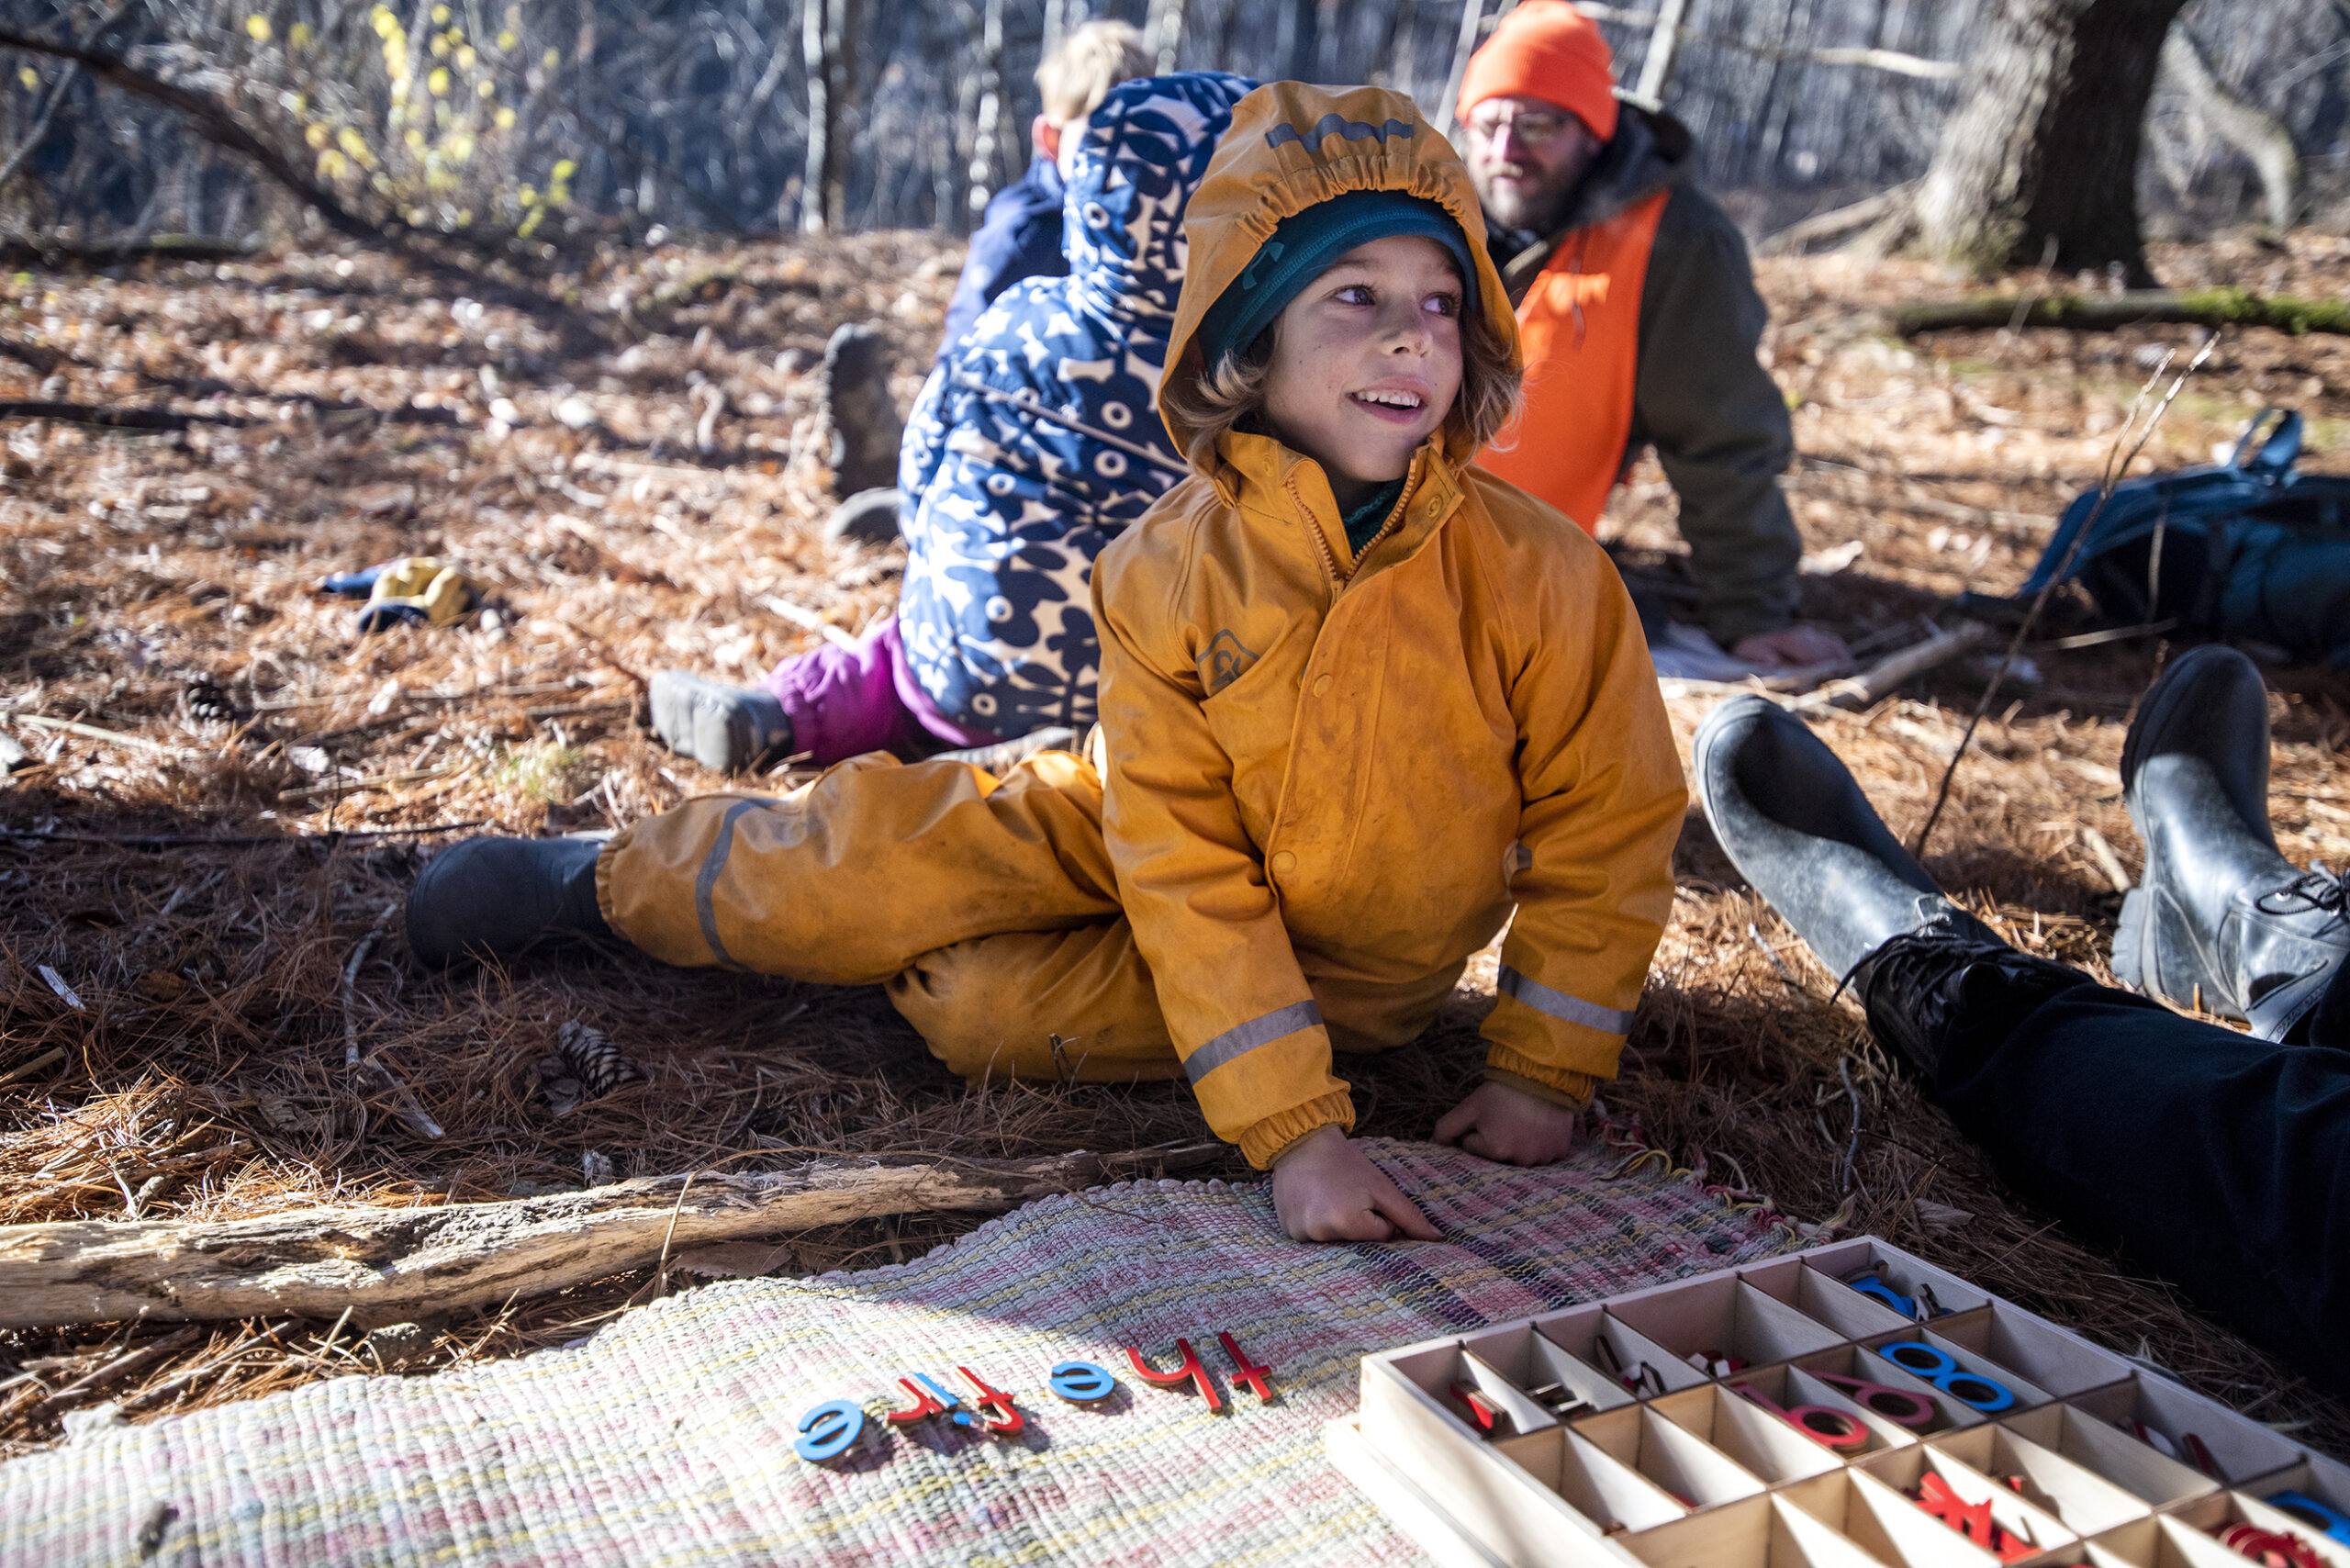 A child in a yellow winter suit sits on the ground during a spelling lesson.